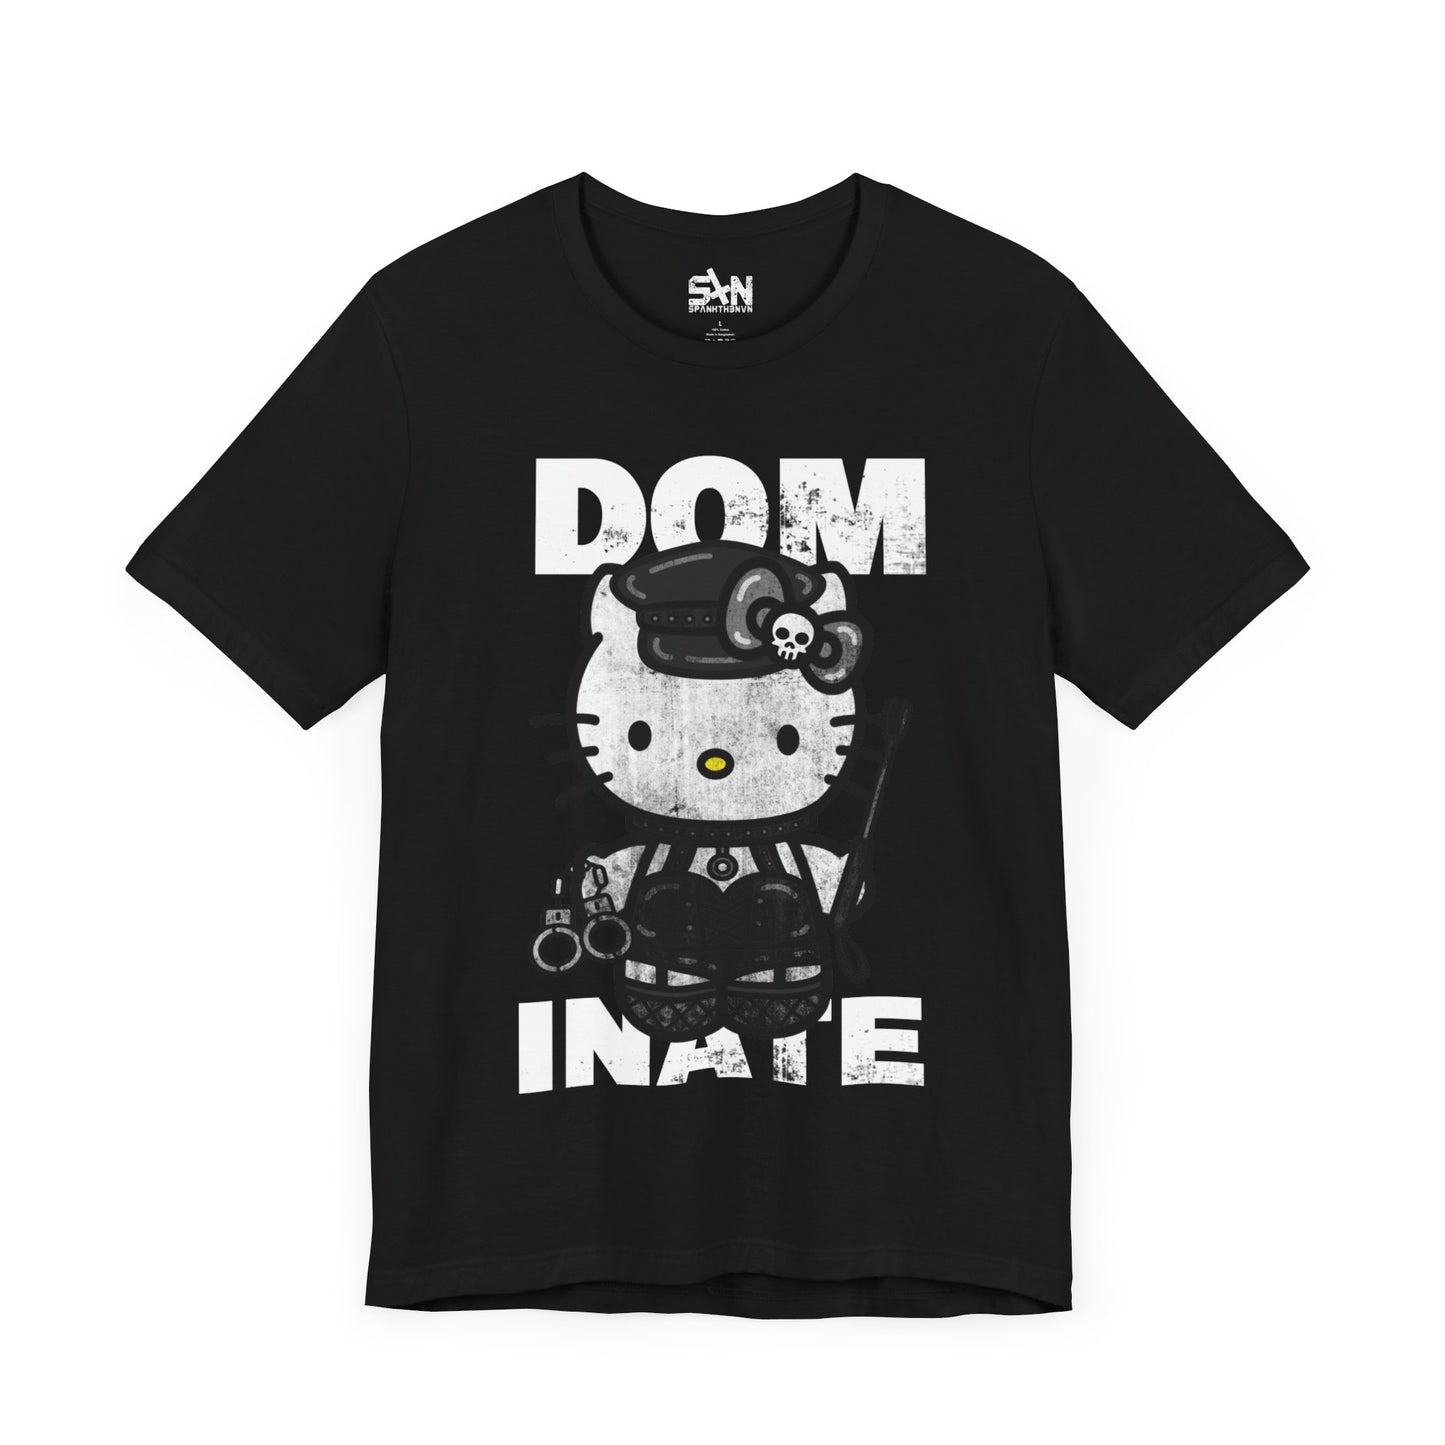 DOMINATE With Your New Favorite Tee